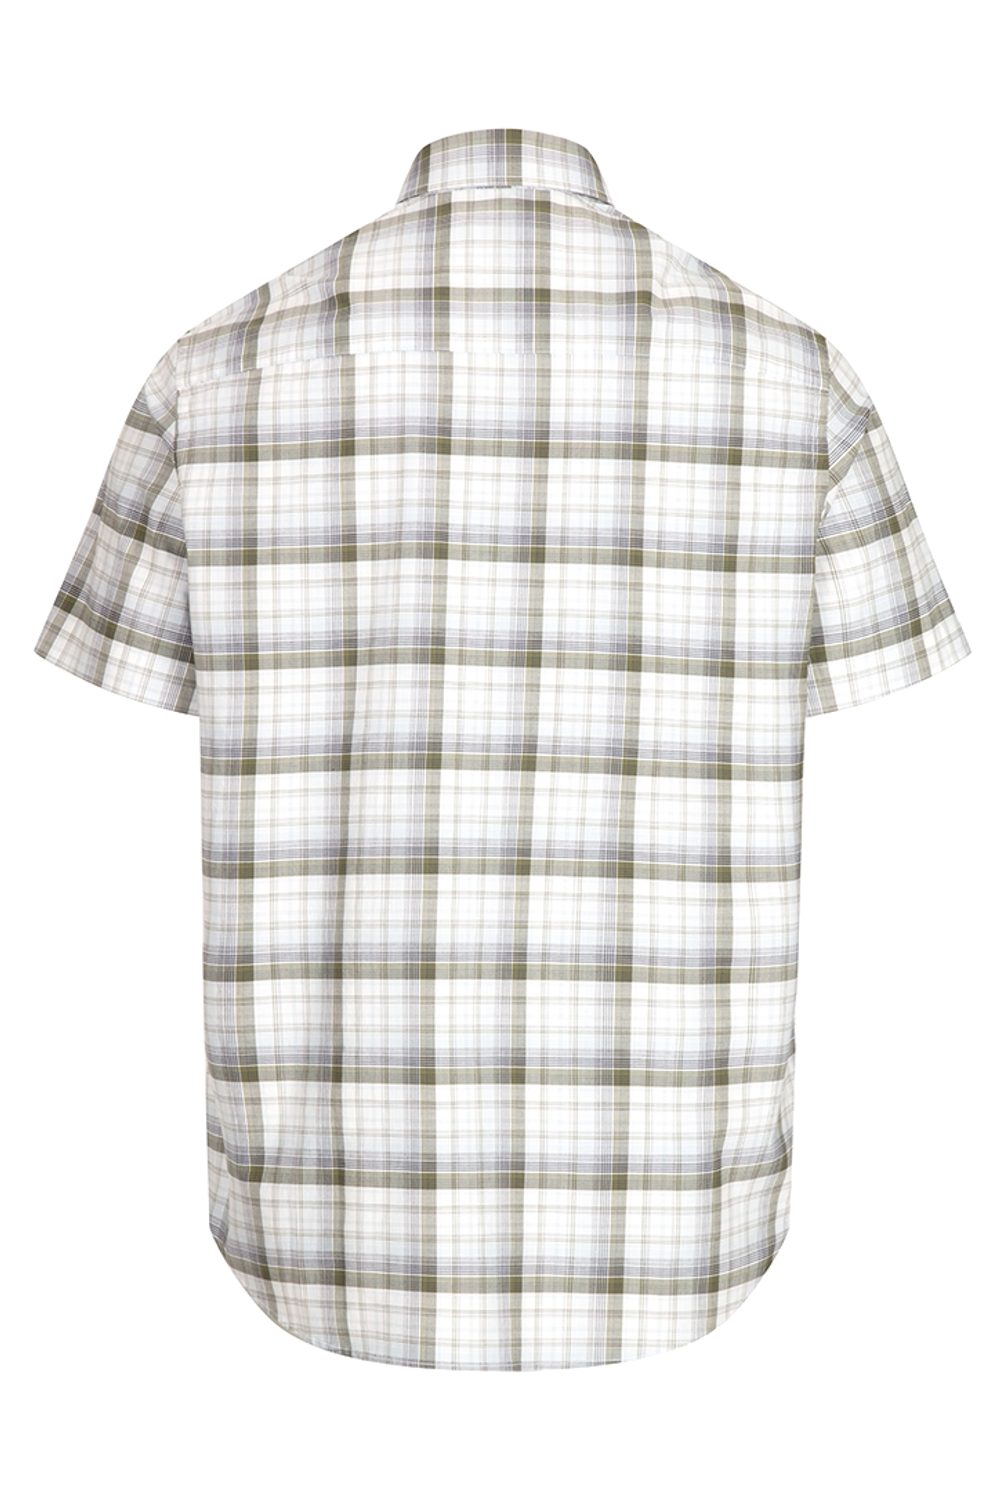 Hoggs Of Fife Tresness Short Sleeve Cotton Stretch Check Shirt in Olive Check 